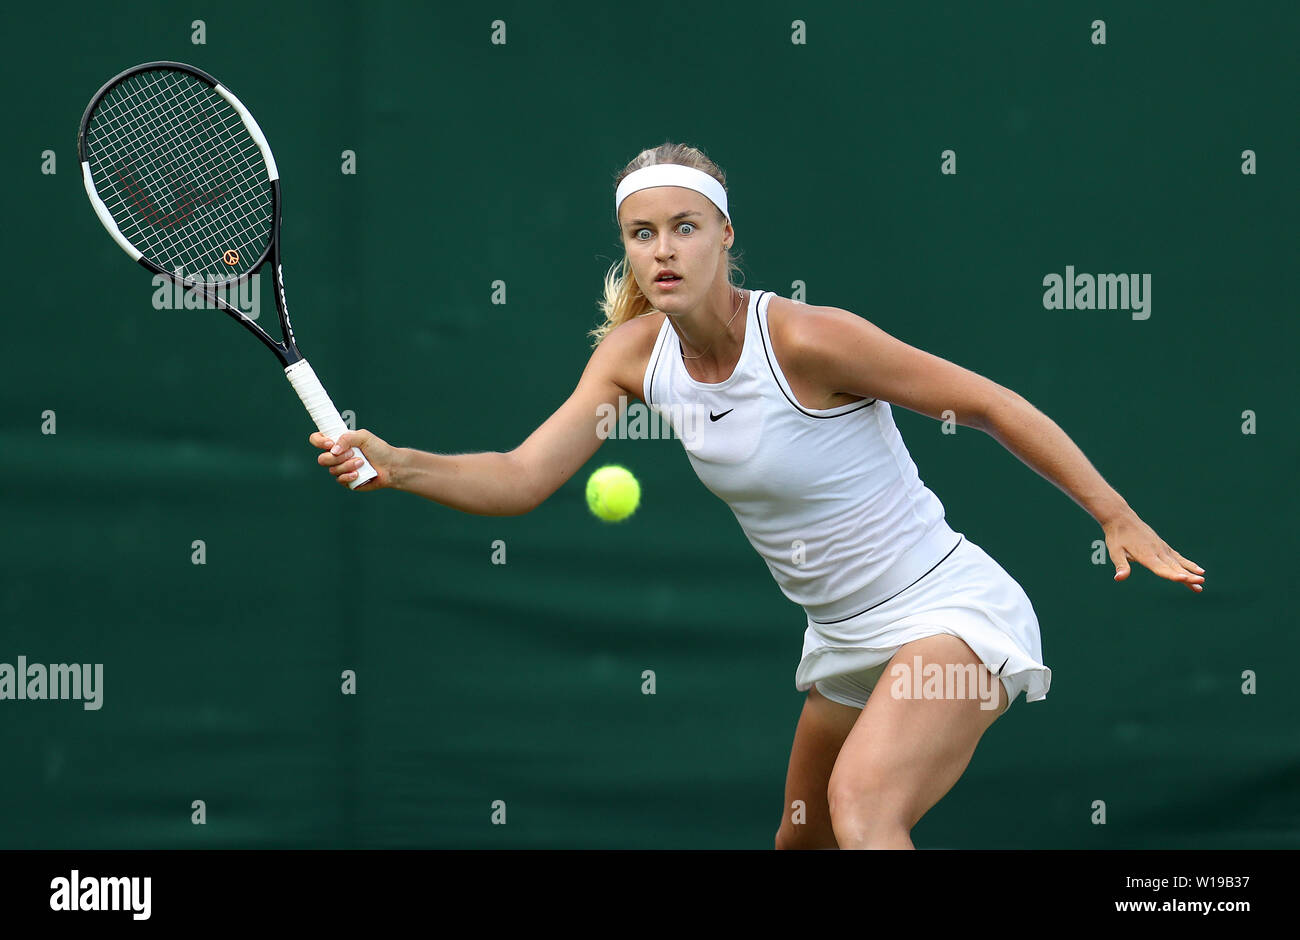 Schmiedlova Tennis High Resolution Stock Photography and Images - Alamy